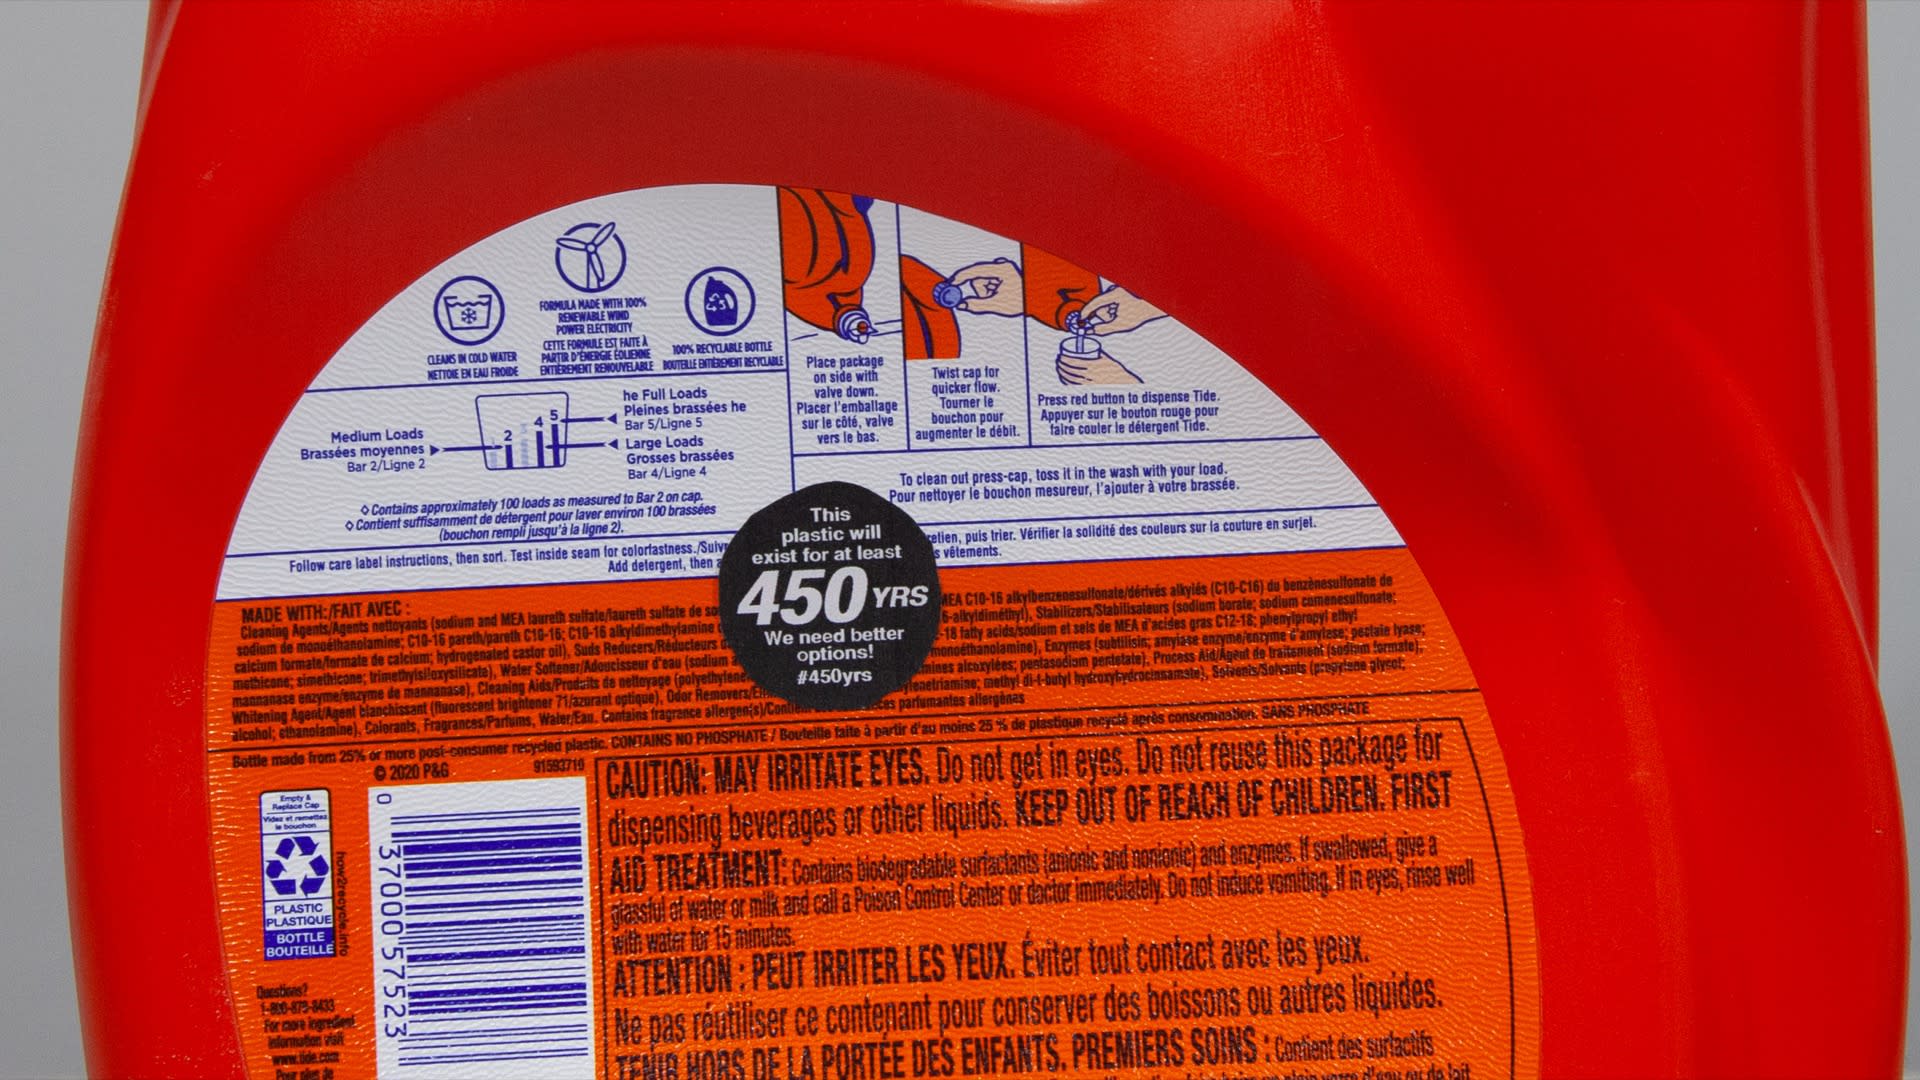 Thumbnail of Close-up of the previous photograph. Namely, a close up of a large, red, plastic laundry detergent bottle sitting on a workbench. In the middle of the bottle is a 1.5 inch, circular sticker that says, 'This plastic will exist for at least 450YRS. We need better options! #450yrs '